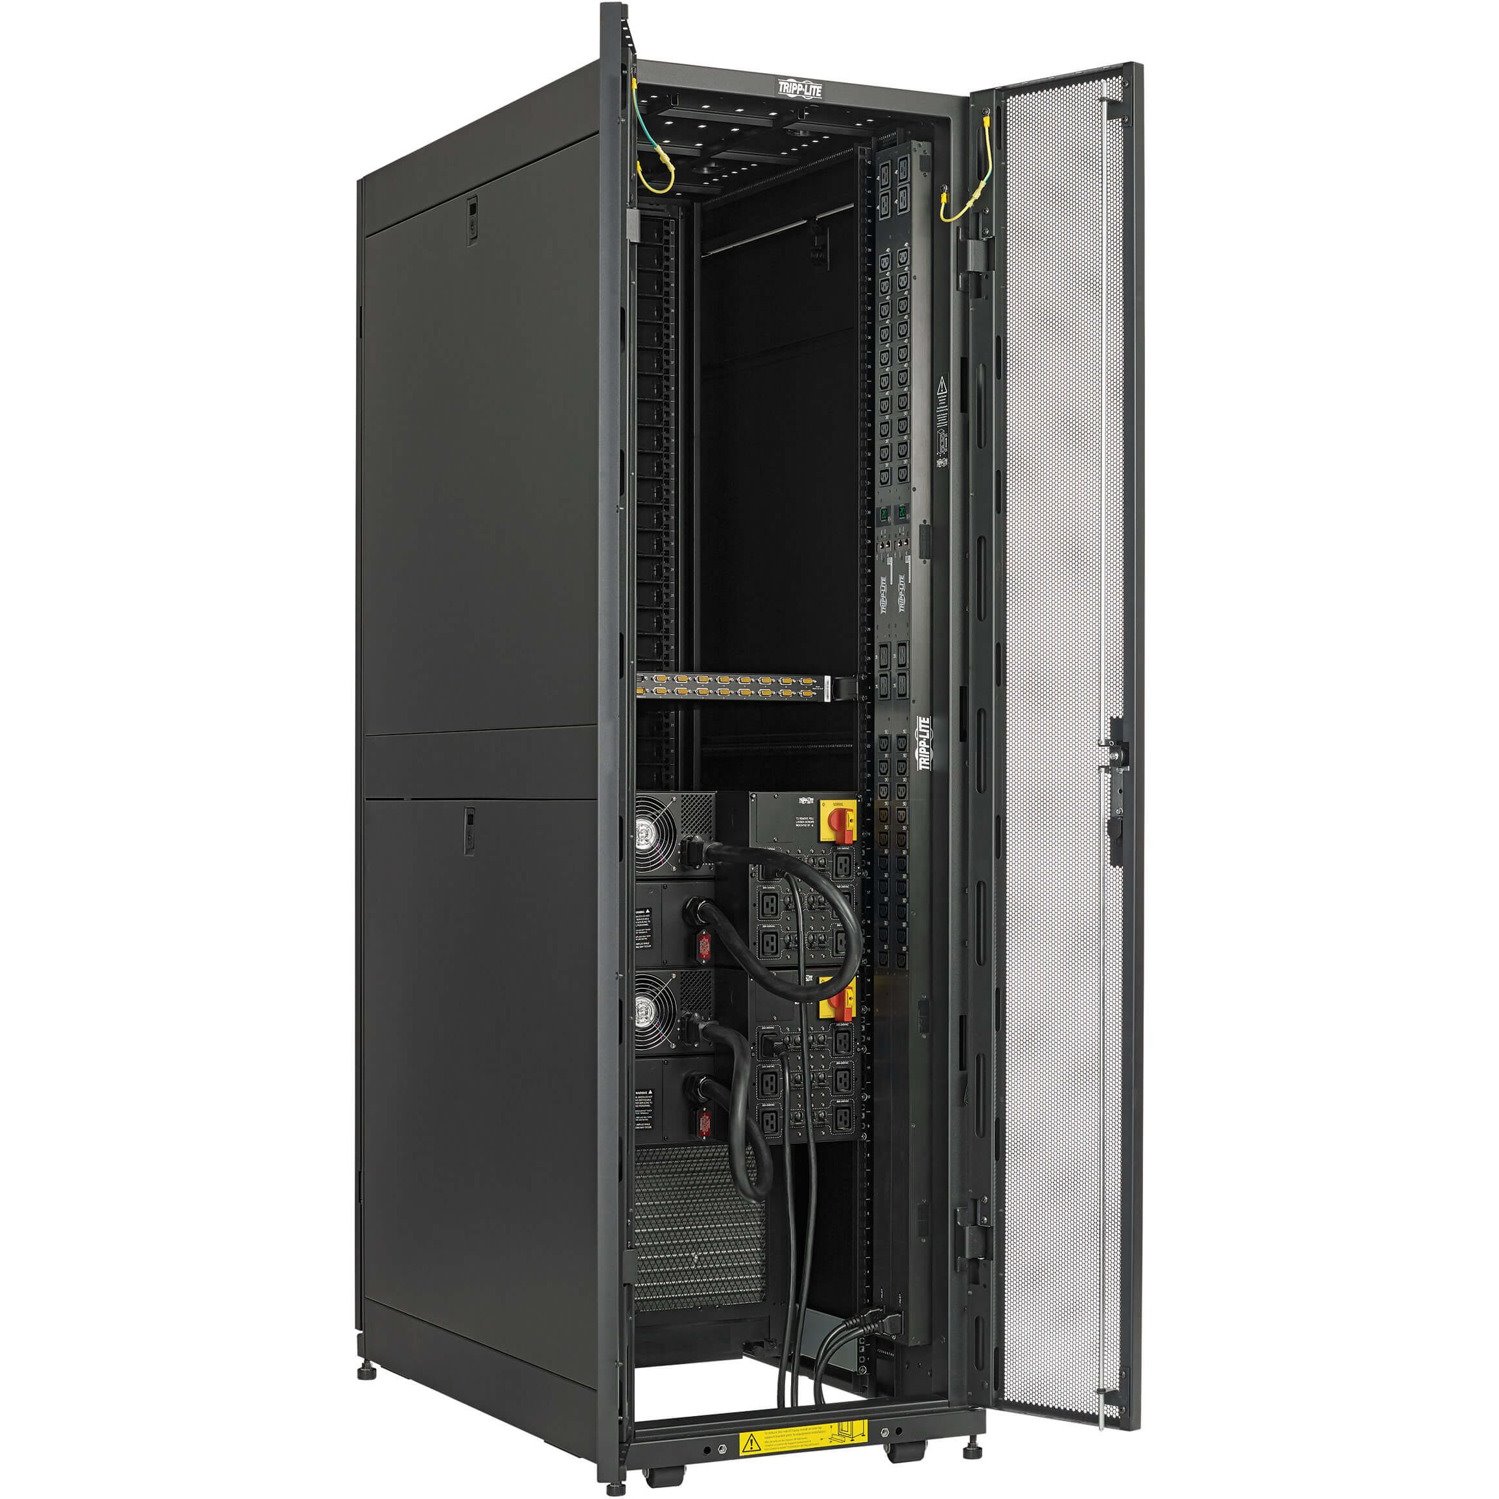 Tripp Lite by Eaton EdgeReady&trade; Micro Data Center - 34U, (2) 6 kVA UPS Systems (N+N), Network Management and Dual PDUs, 208/240V or 230V Assembled/Tested Unit